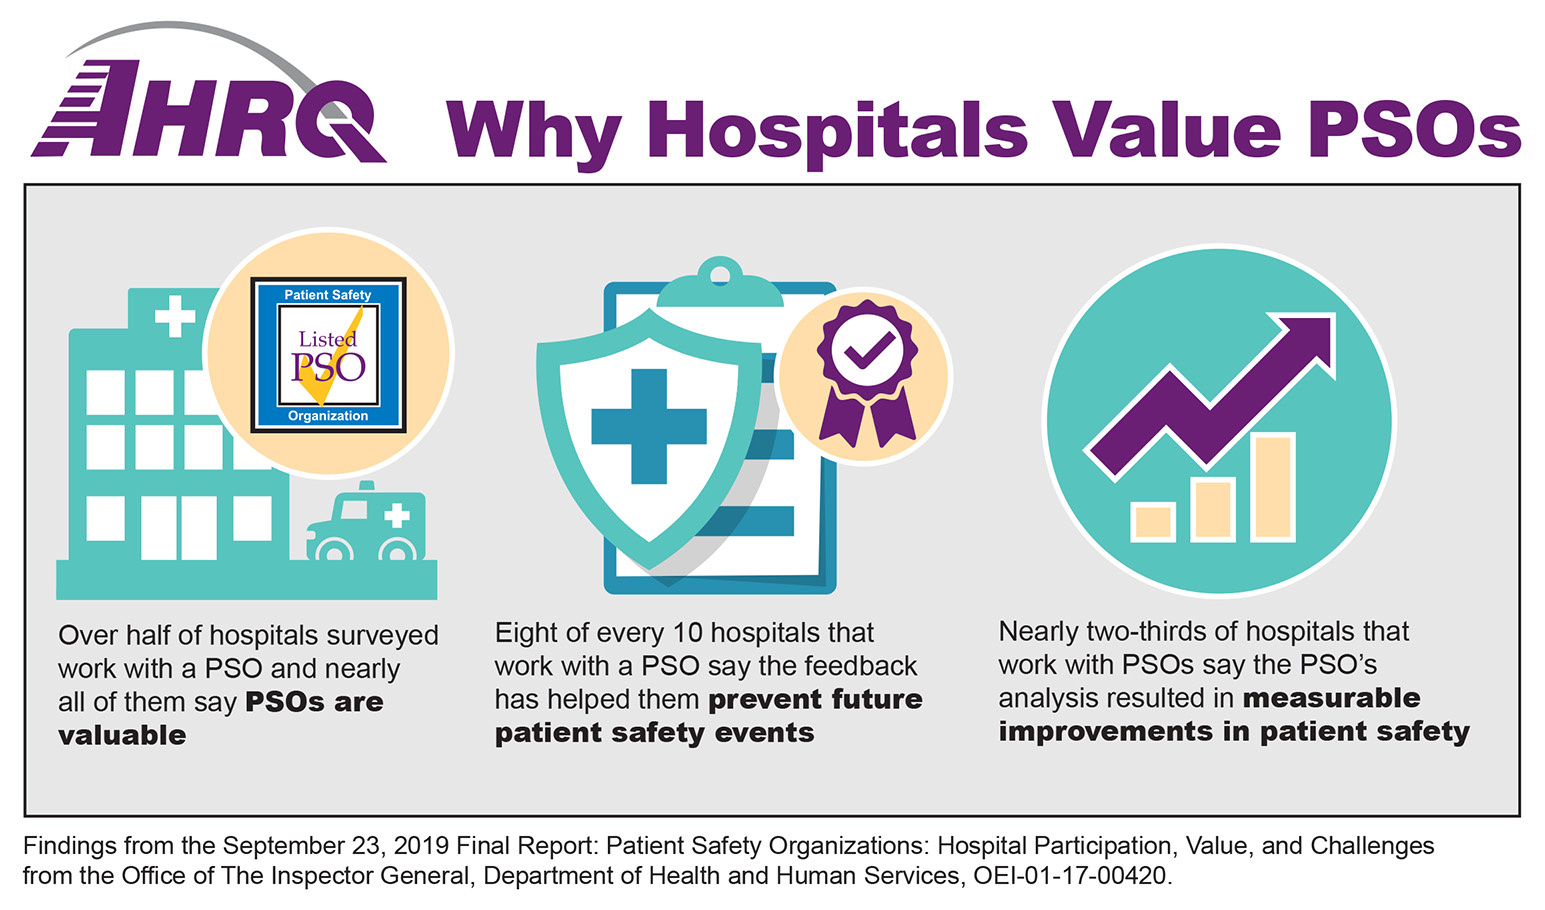 This infographic describes three reasons why hospitals value PSOs. Over half of hospitals surveyed work with a PSO and nearly all of them say PSOs are valuable. Eight of every 10 hospitals that work with a PSO say their feedback has helped them prevent future patient safety events. Nearly two-thirds of hospitals that work with PSOs say the PSO’s analysis resulted in measurable improvements in patient safety. These findings are from the September 23,2019 Final Report: Patient Safety Organizations: Hospital Participation, Value, and Challenges, The Office of the Inspector General, Department of Health and Human Services, OEA1-01-17-00420.